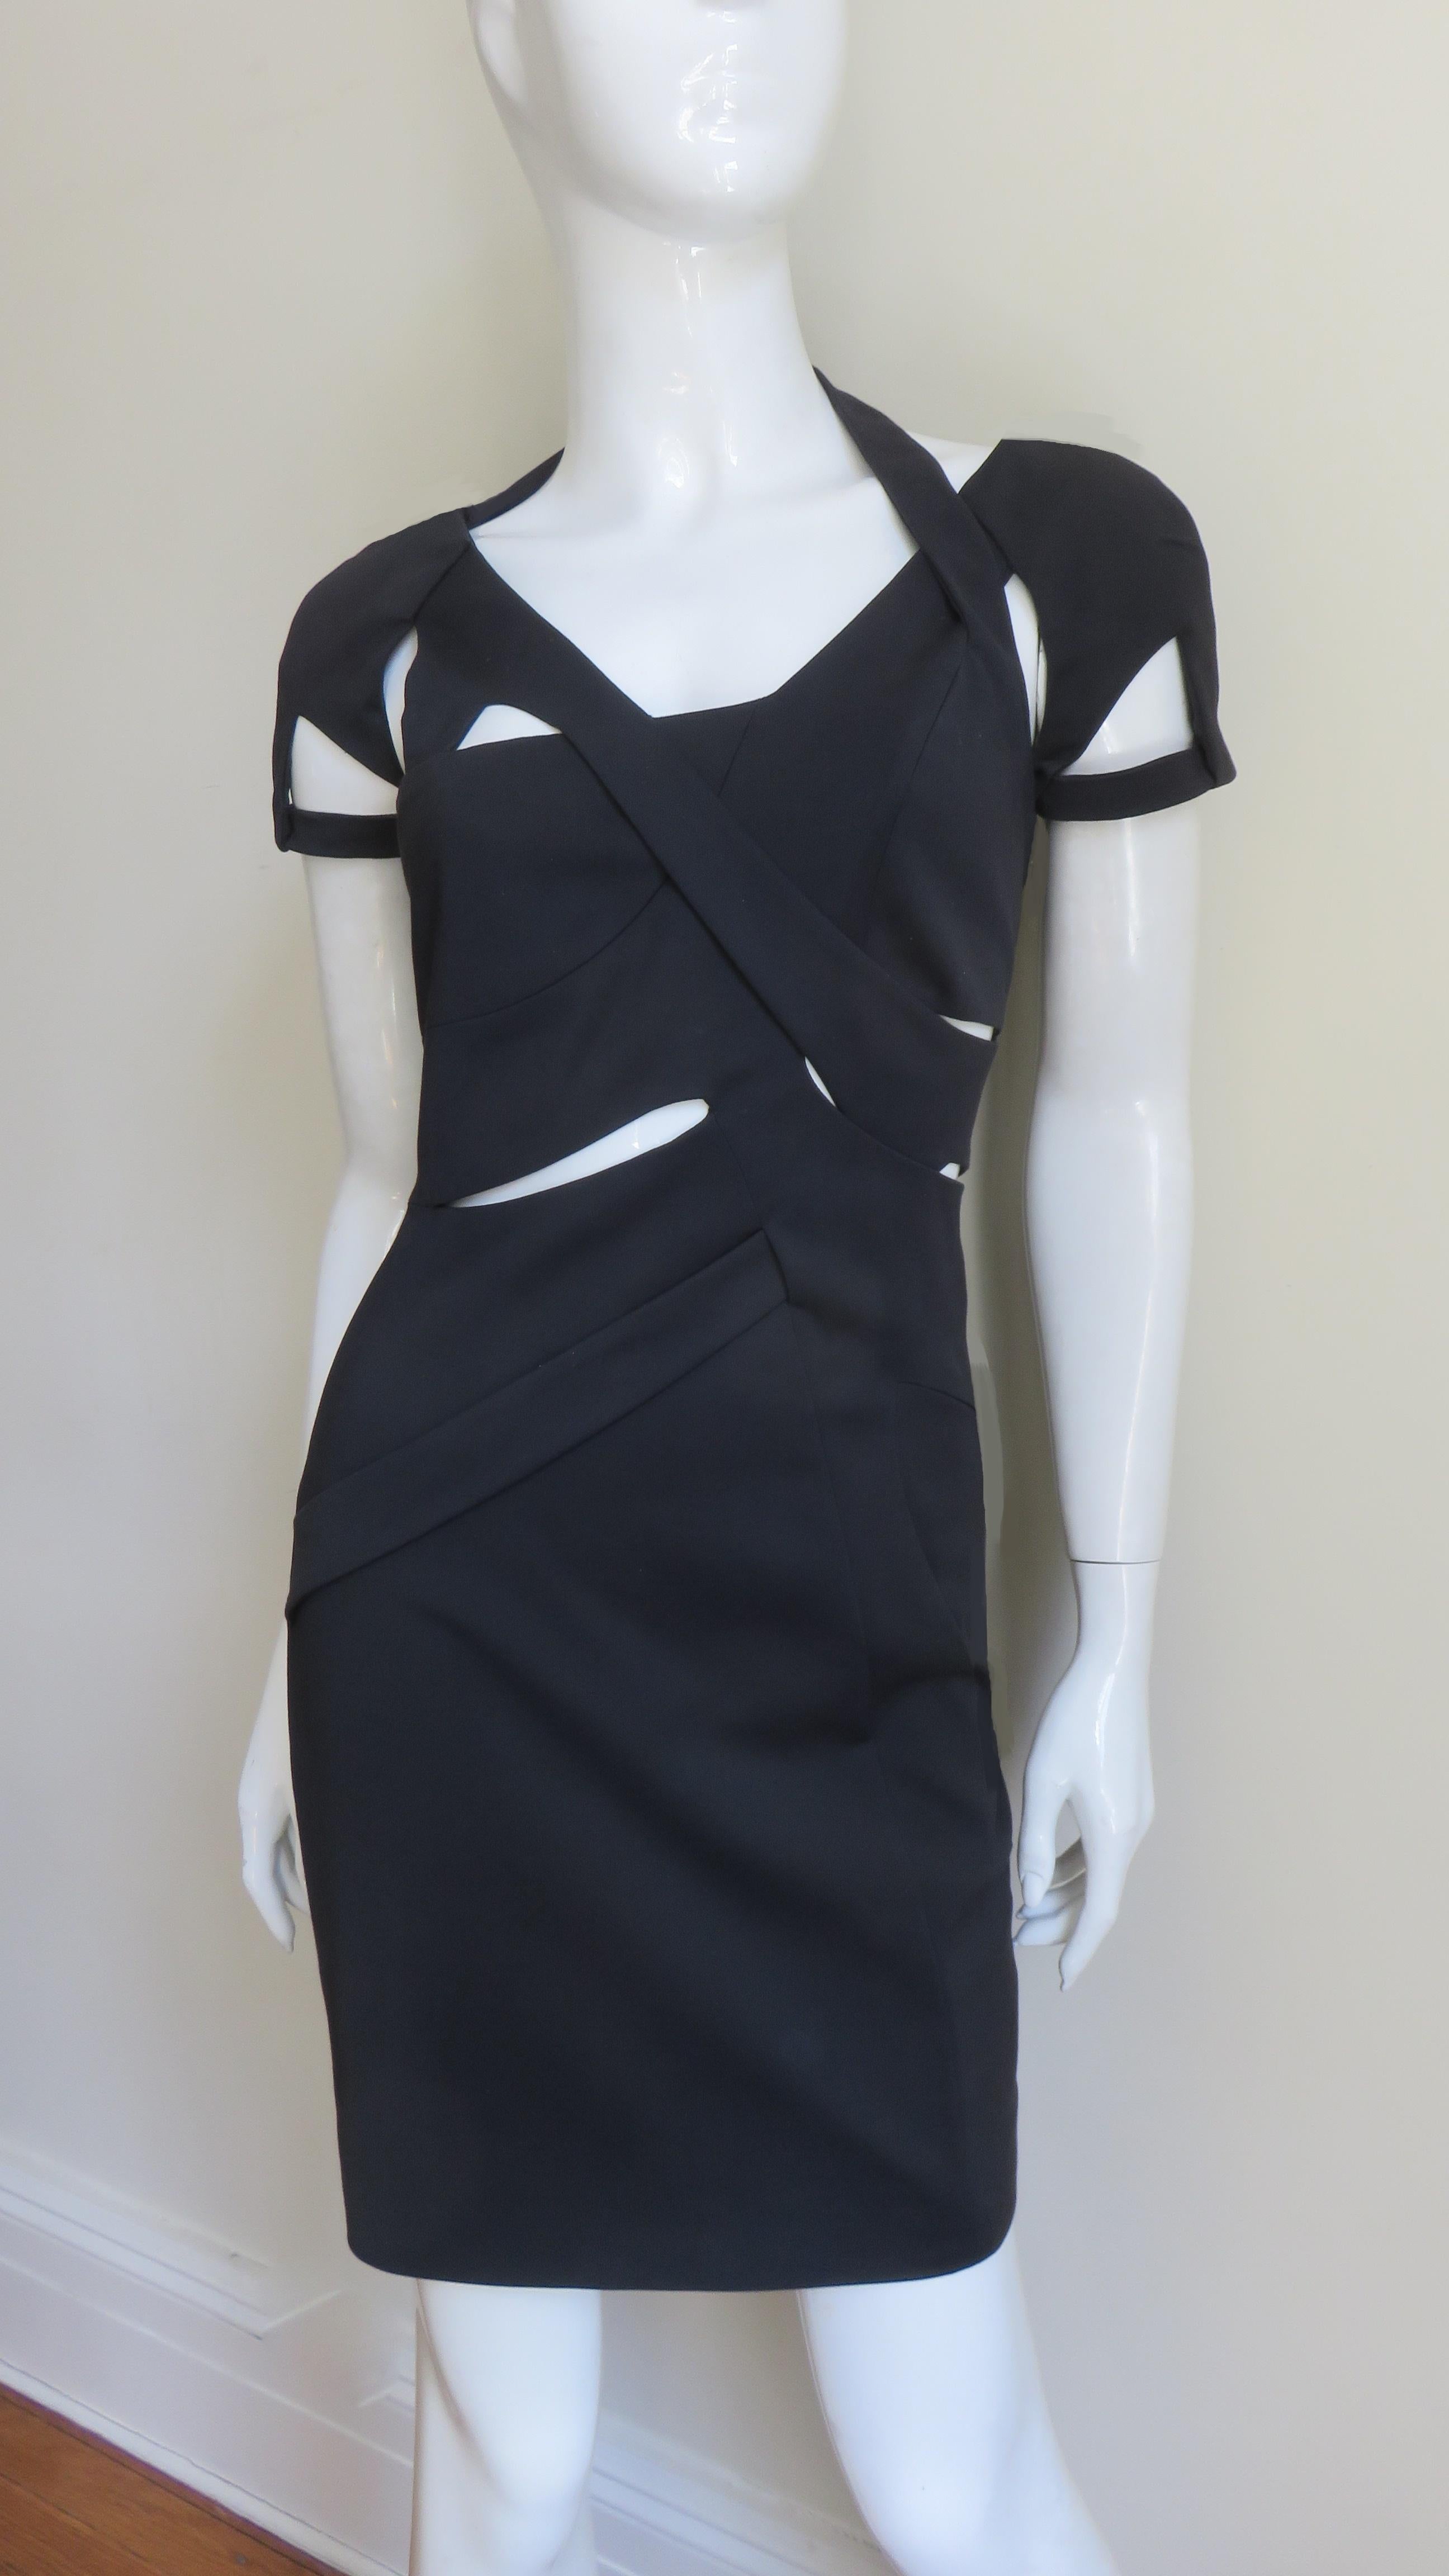 A fabulous black stretch fitted dress from Gucci as worn by Rhianna on the 2010 cover of W magazine.  It has short sleeves plus asymmetric seaming, straps and cut outs through out the front and back bodice.  It  has a bit of stretch for a great fit,